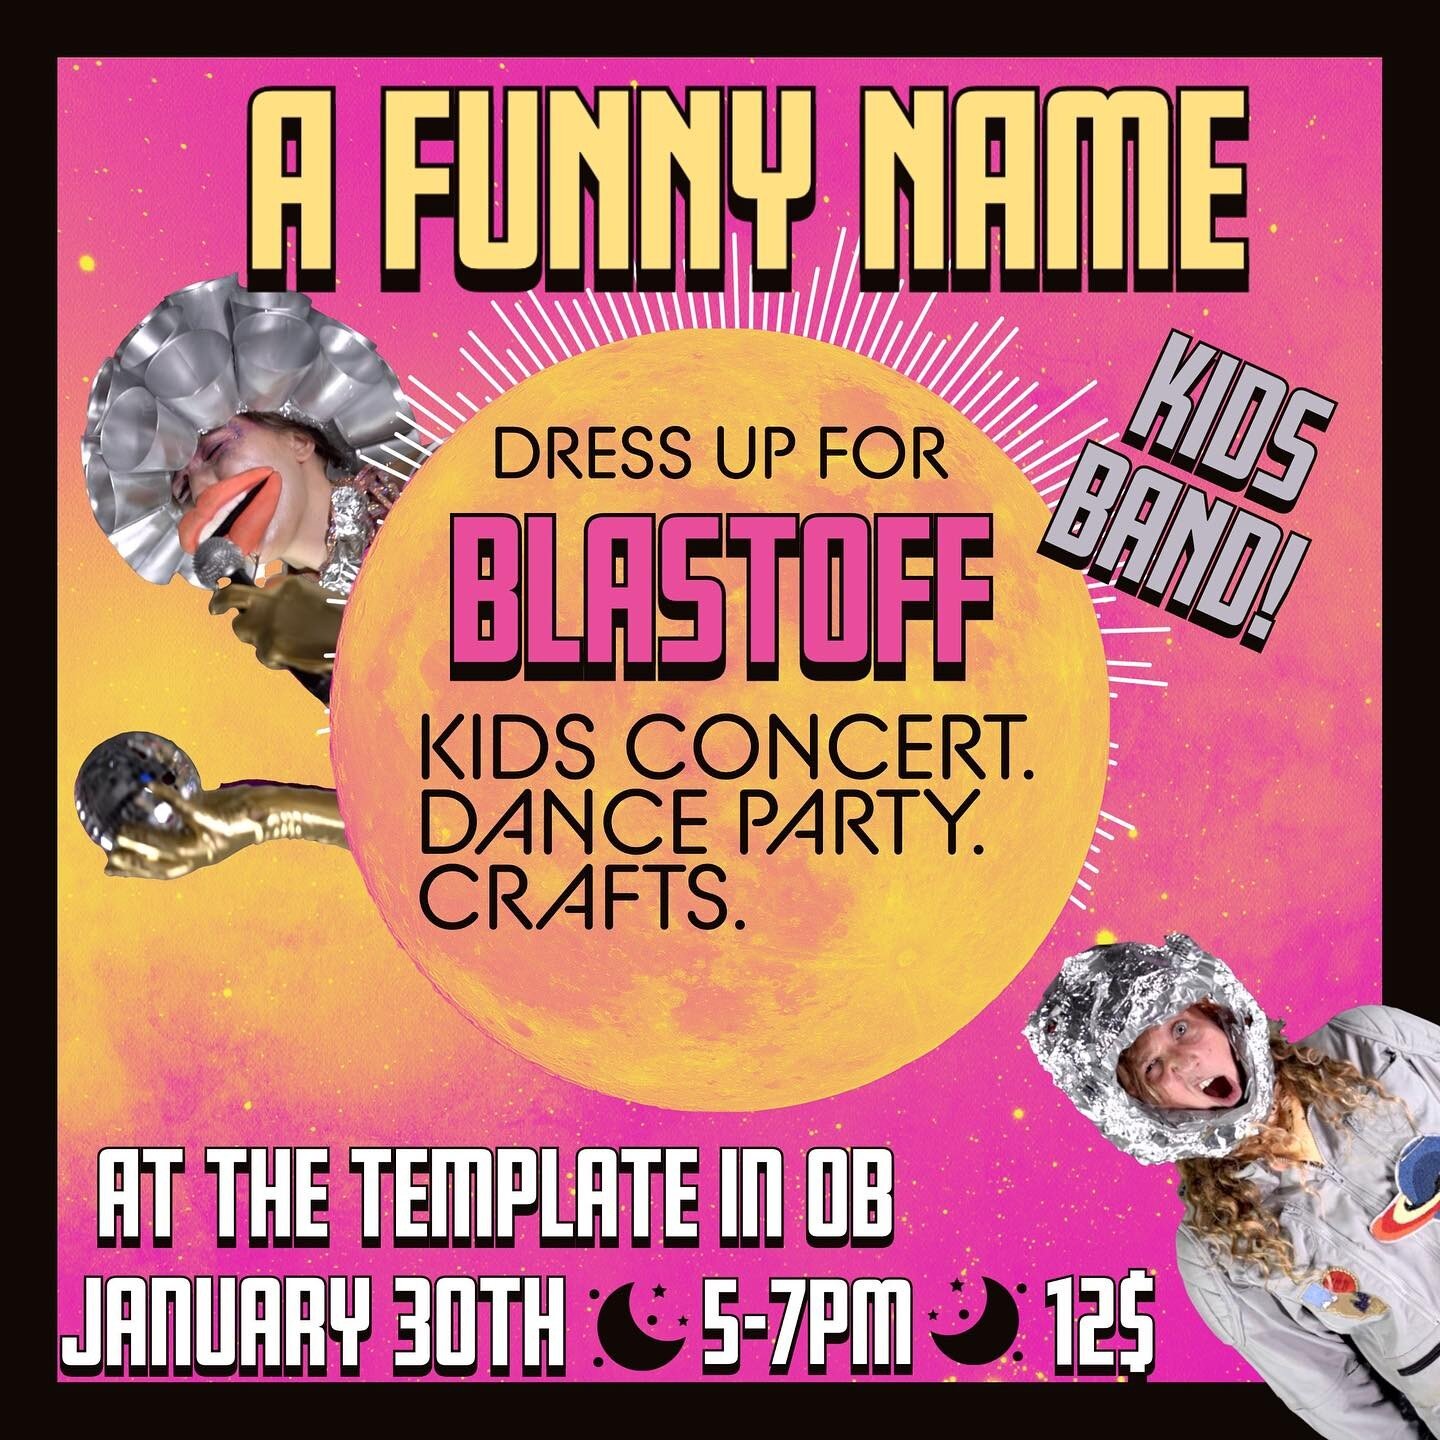 A Funny Name is back! Come join the band as we blast off to space! An event for the whole family! Kids concert, activities, and space themed party to celebrate the release our new music video! Sunday, January 30th from 5-7pm at the Templete in Ocean 